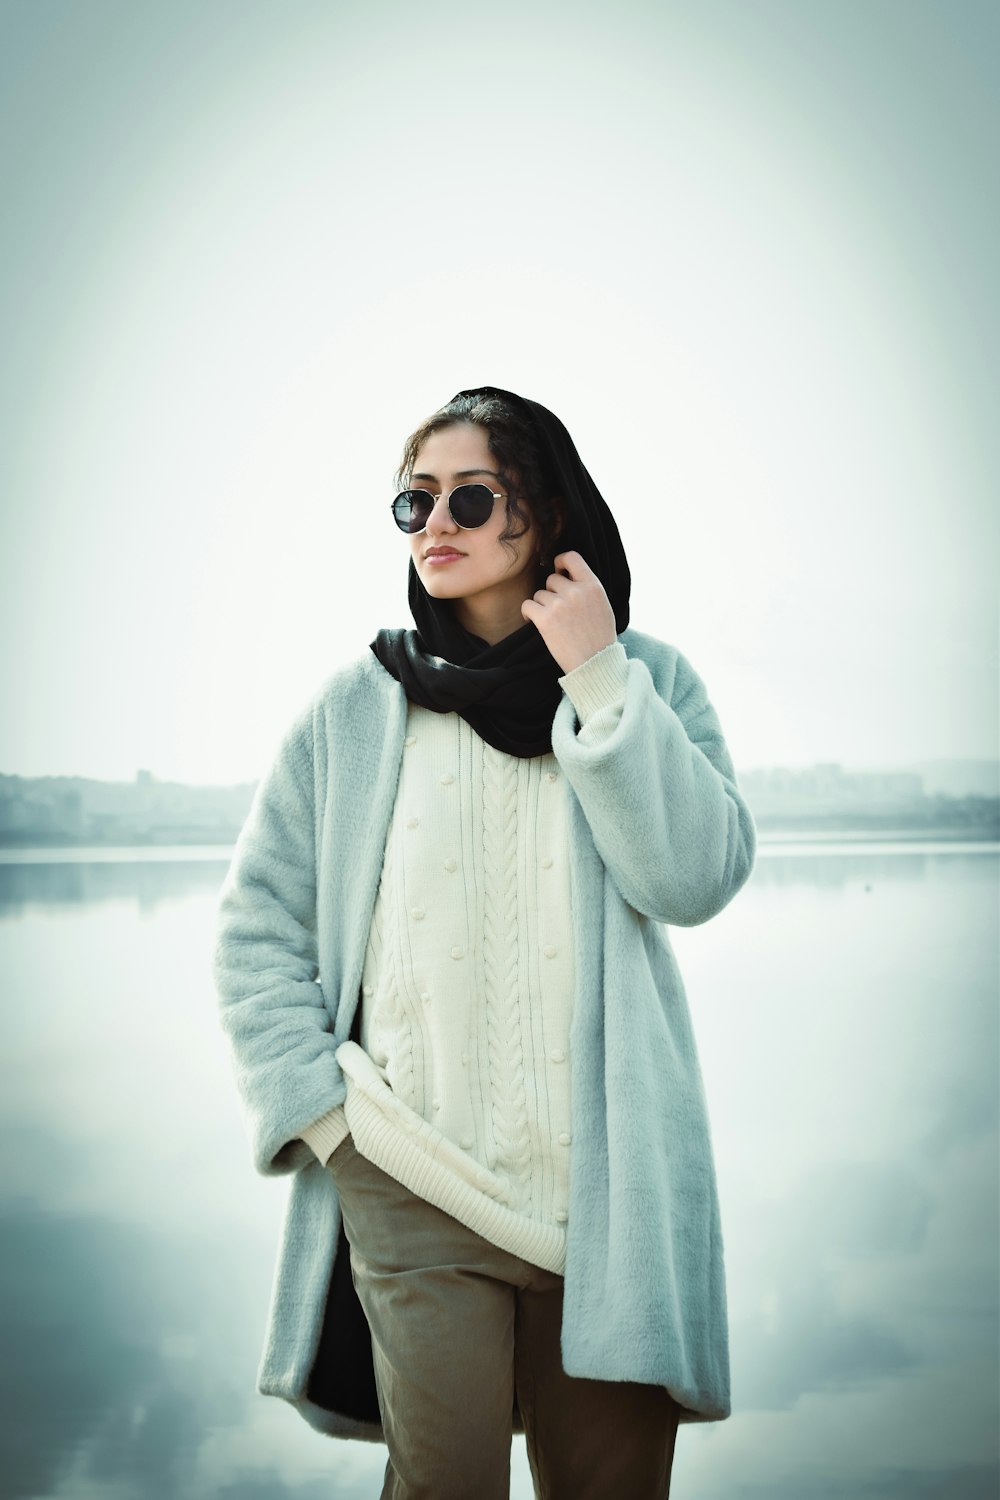 a woman wearing sunglasses and a coat by the water